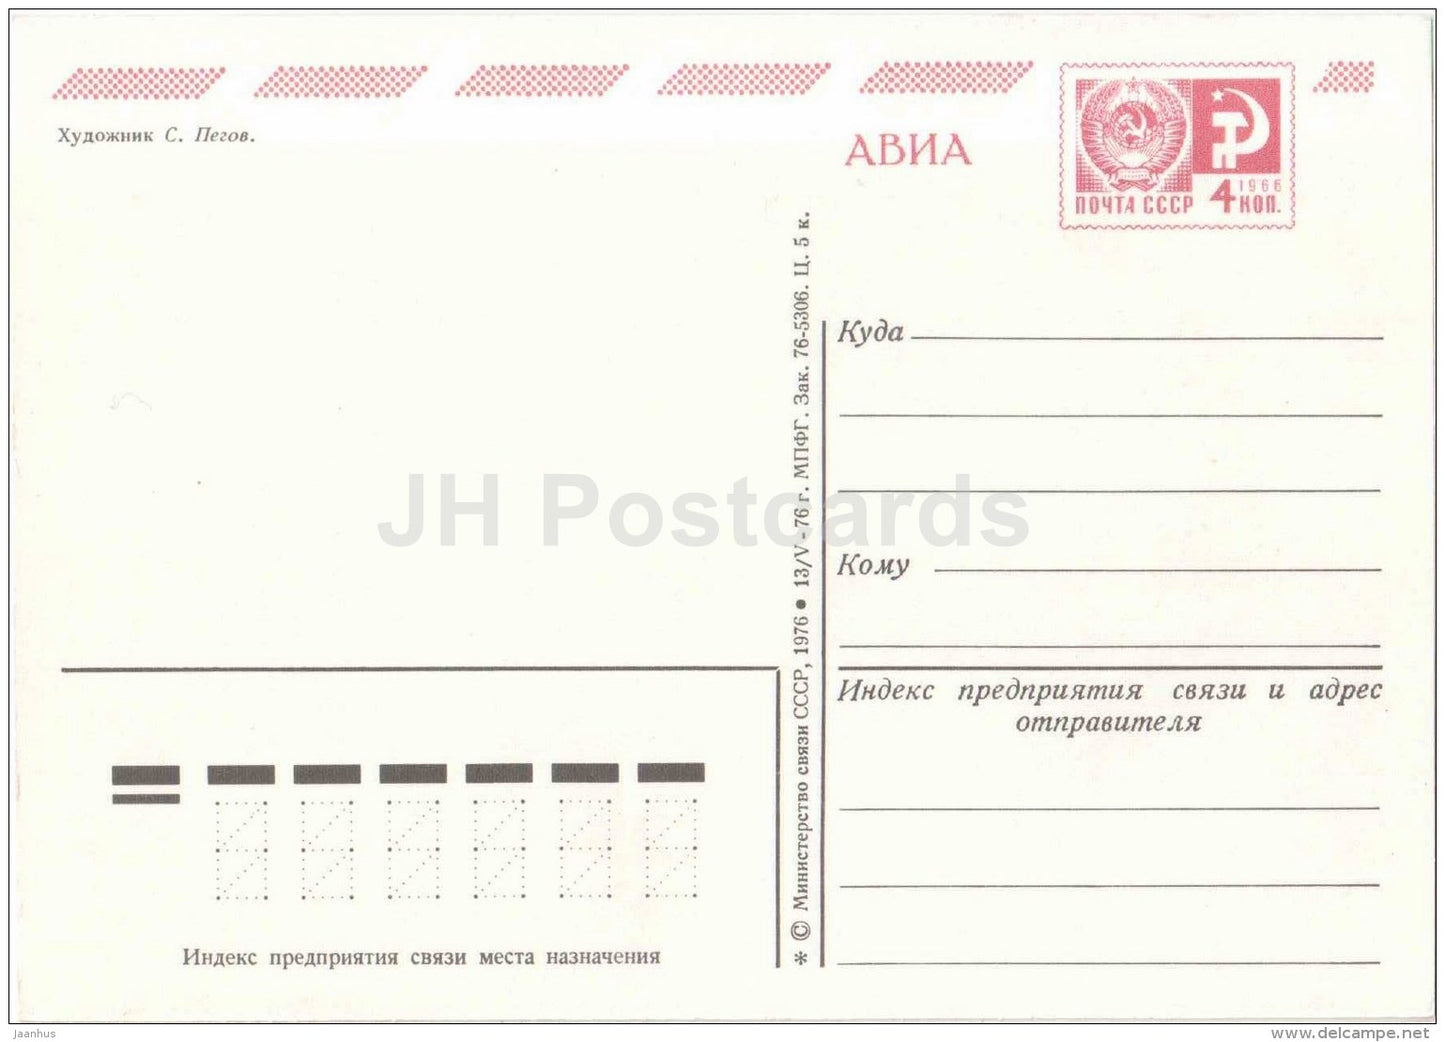 New Year Greeting Card by S. Pegov - horses - troika - AVIA - postal stationery - 1976 - Russia USSR - unused - JH Postcards